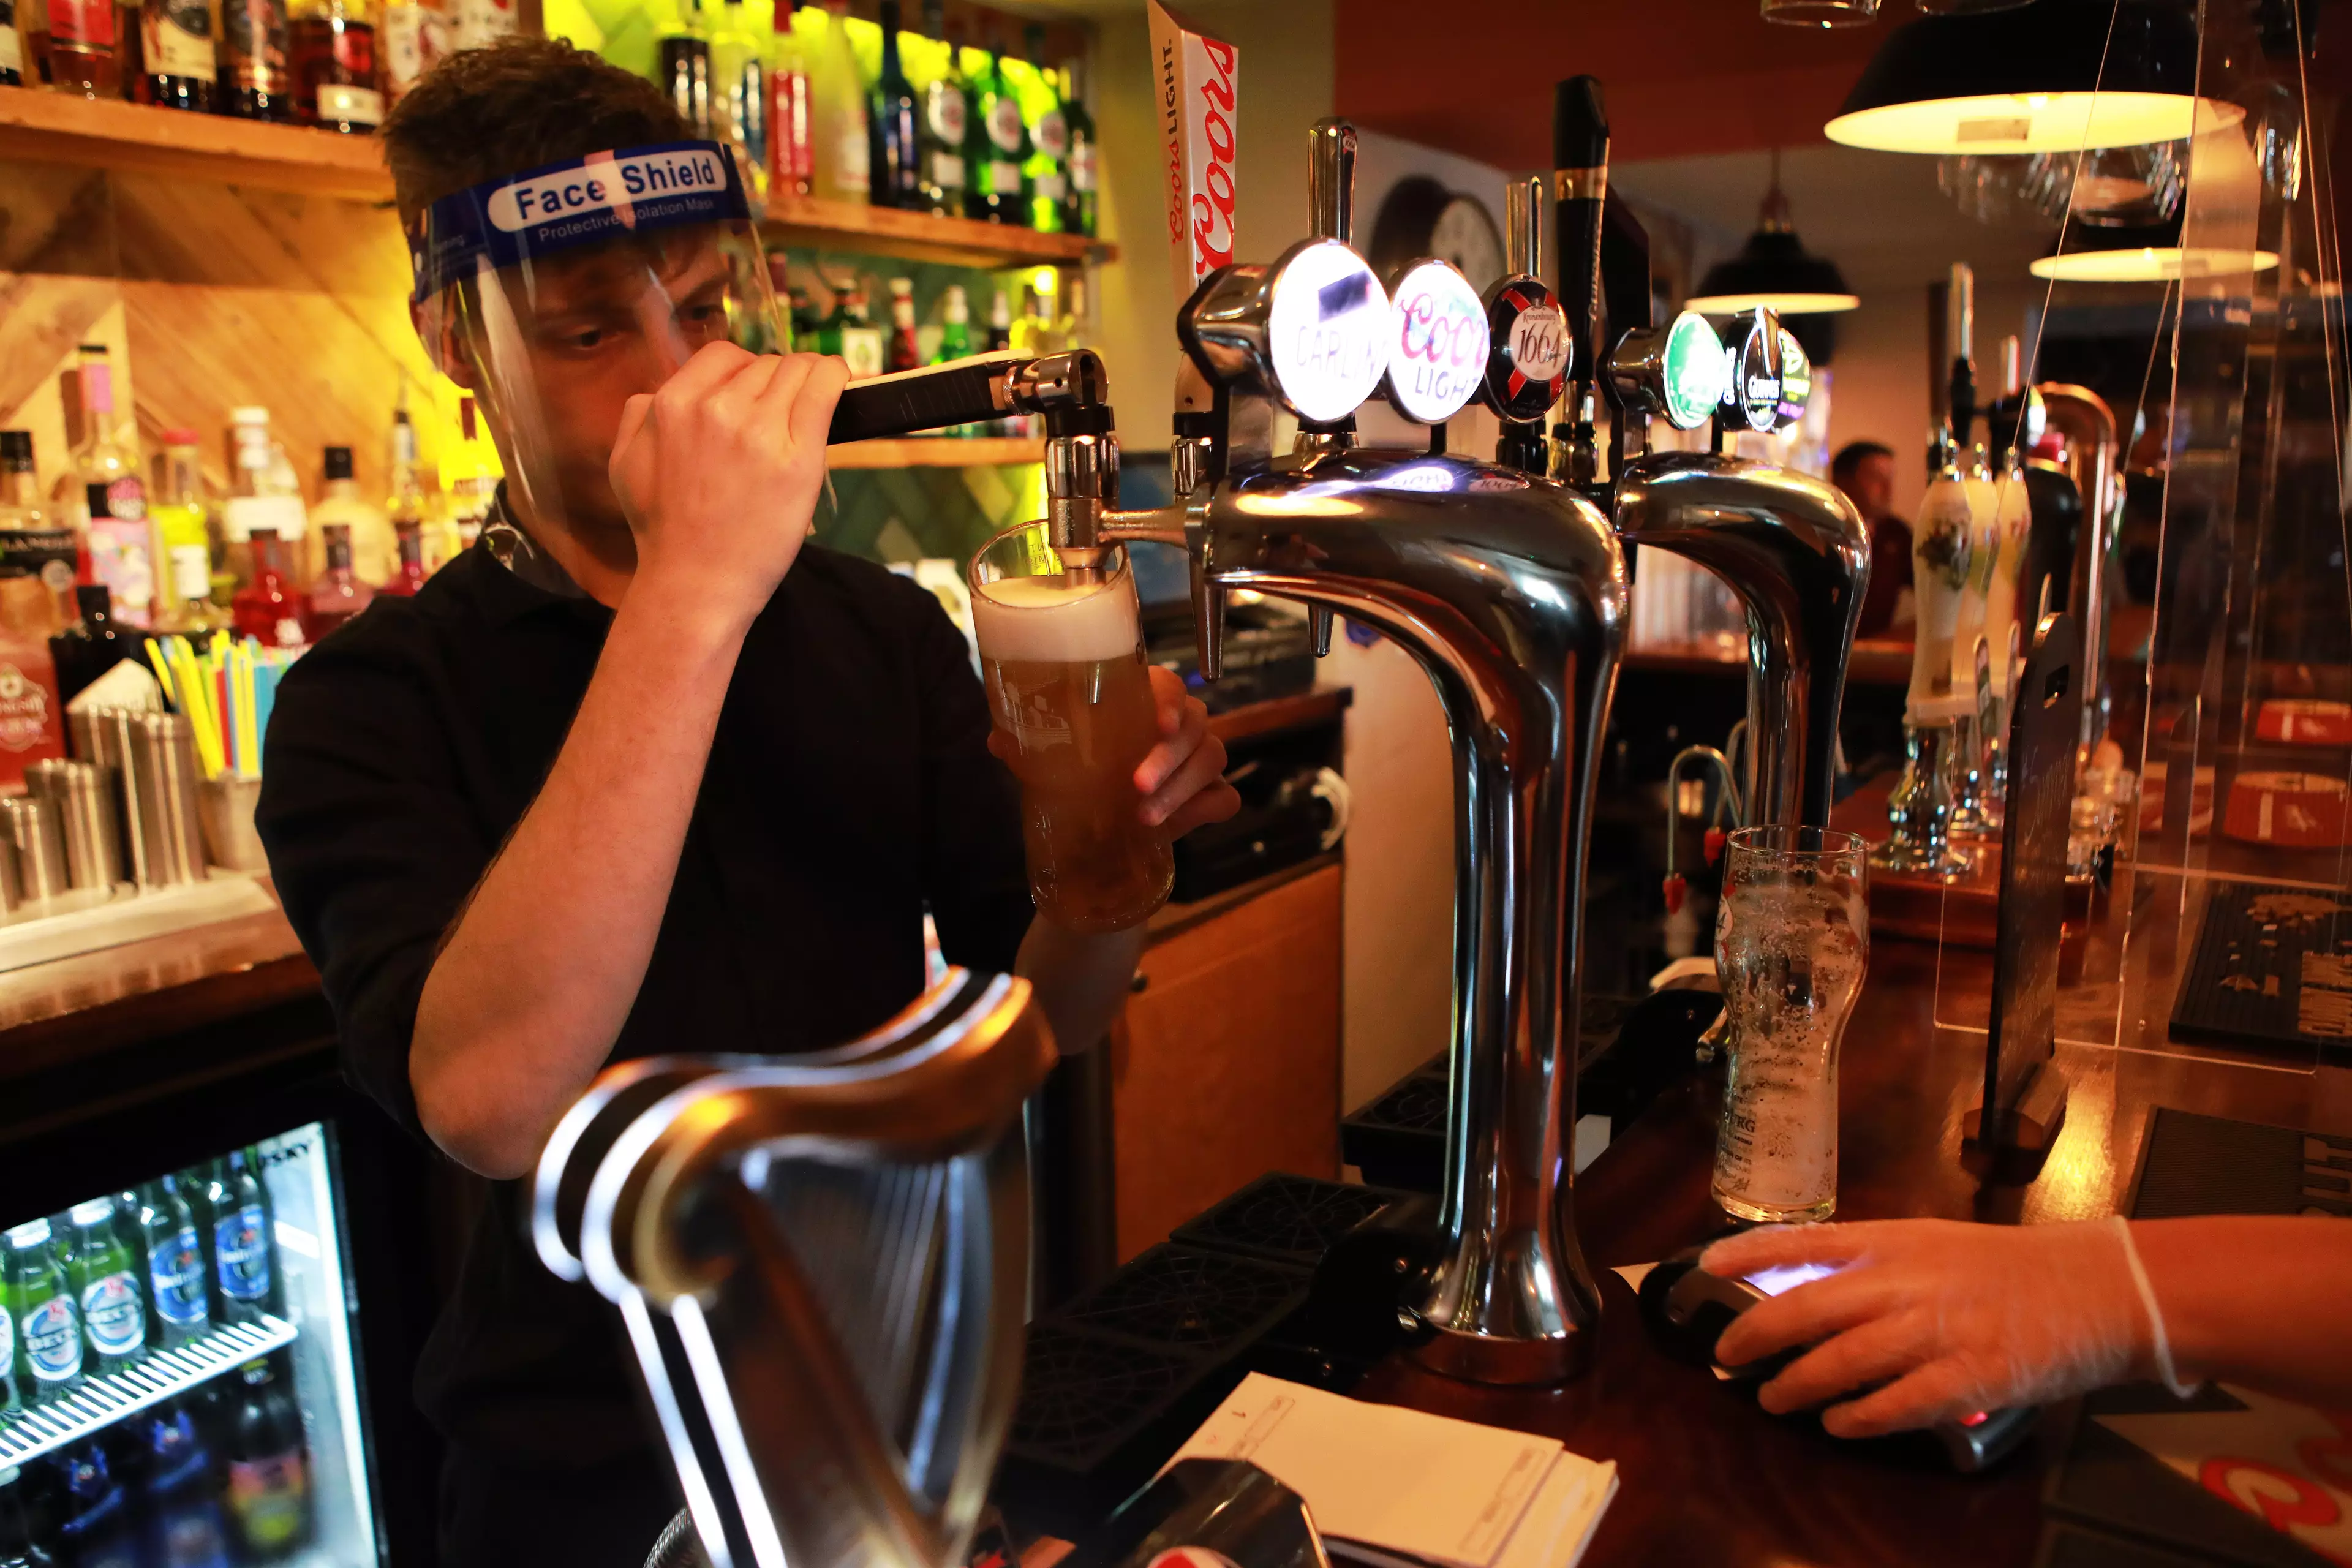 The four tests have been met, meaning that the pubs can reopen.